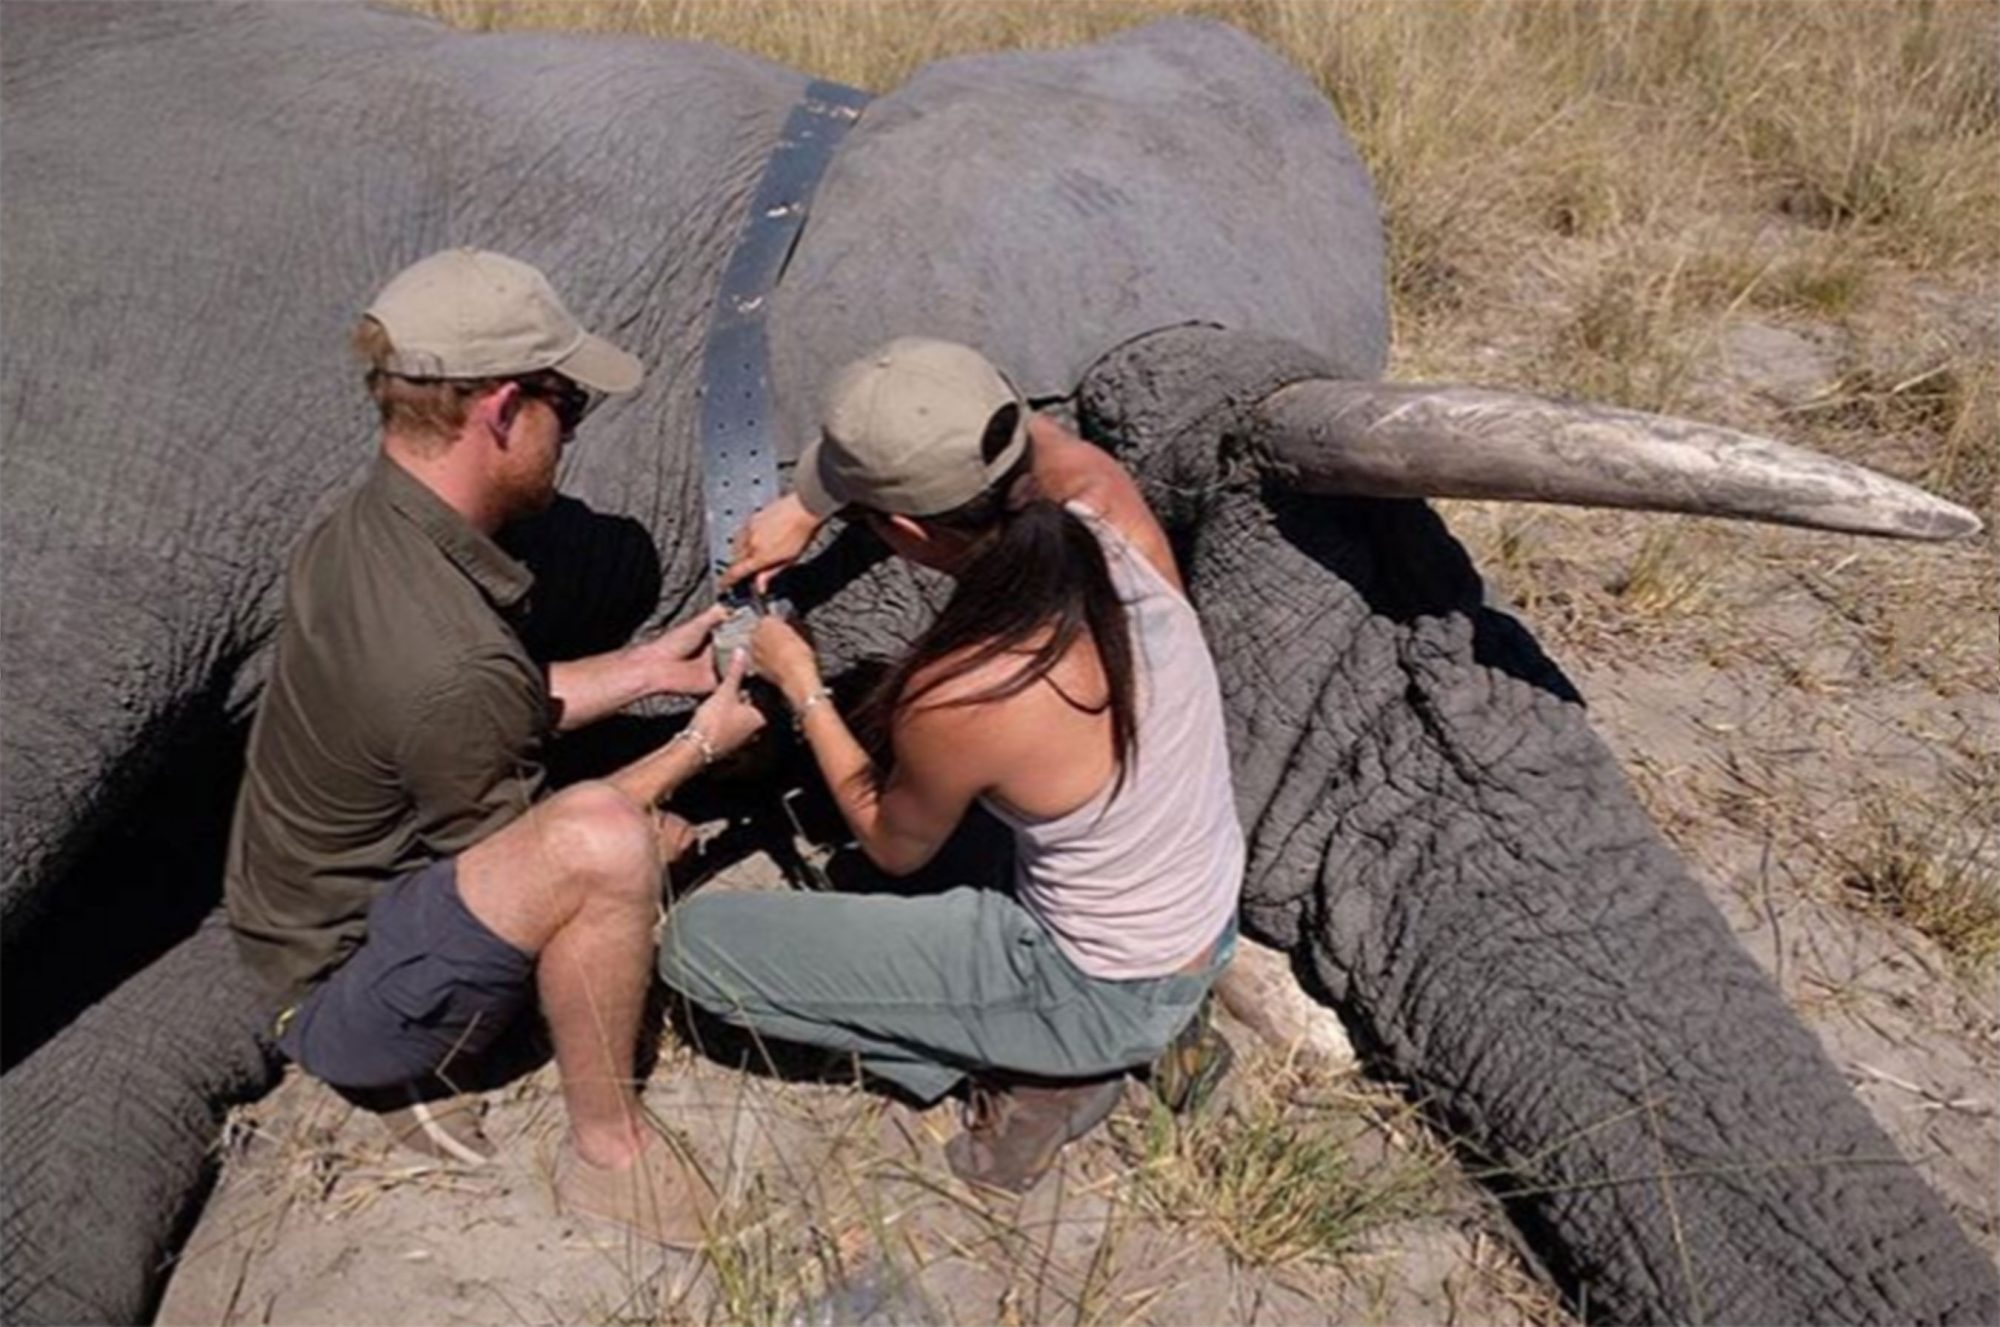 Meghan Markle 'transfixed' by elephants and their 'female empowerment side'